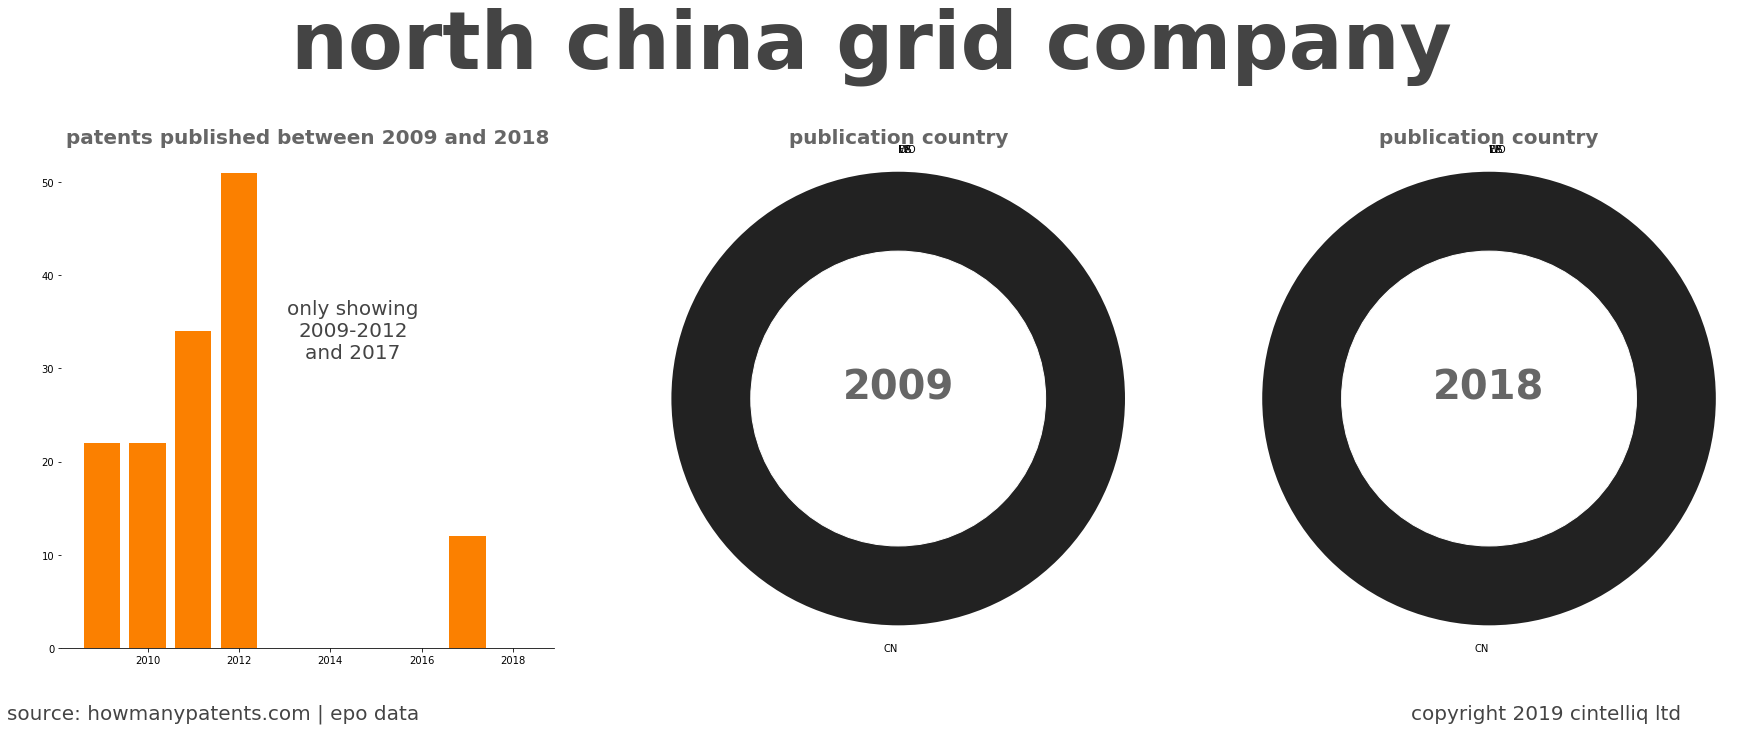 summary of patents for North China Grid Company